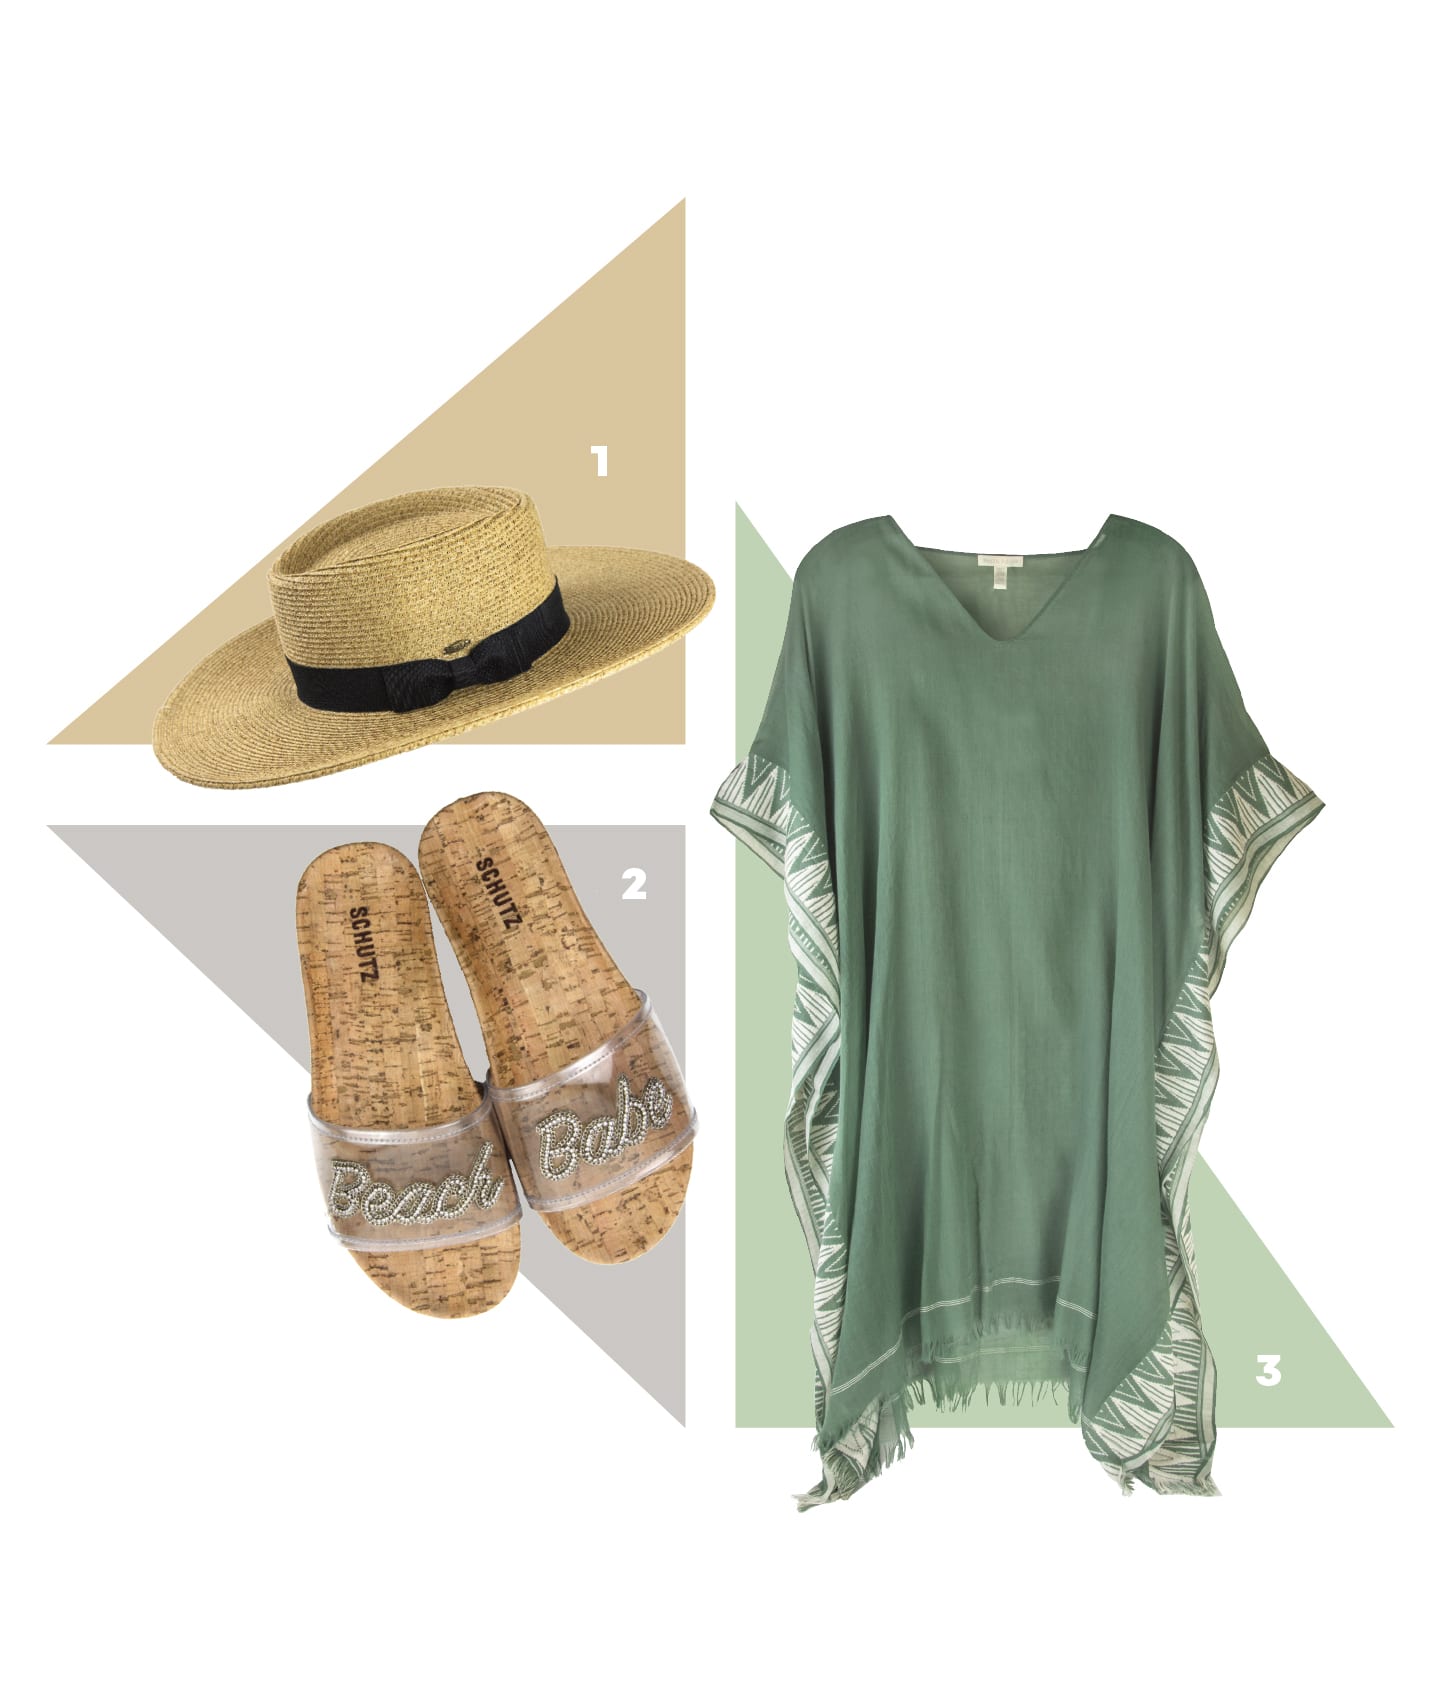 Braided Gondolier Hat by Scala Collezione, Beach Babe Sandals by Shutz, and V-Neck Poncho by Eileen Fisher in chattanooga summer beach and pool looks